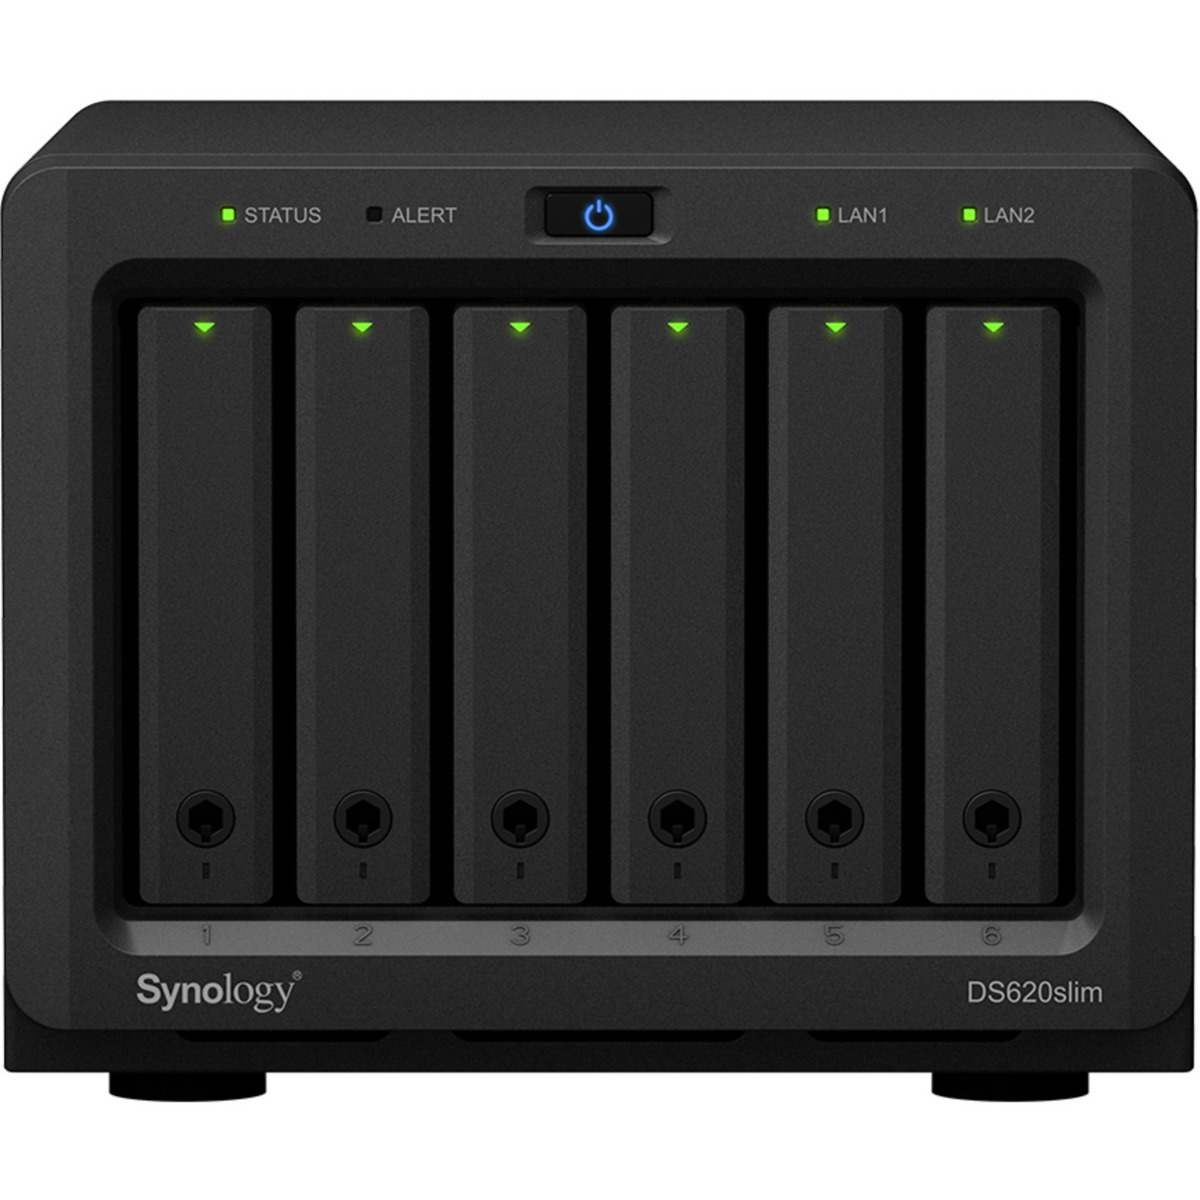 Synology DiskStation DS620slim 5tb 6-Bay Desktop Multimedia / Power User / Business NAS - Network Attached Storage Device 5x1tb Sandisk Ultra 3D SDSSDH3-1T00 2.5 560/520MB/s SATA 6Gb/s SSD CONSUMER Class Drives Installed - Burn-In Tested - FREE RAM UPGRADE DiskStation DS620slim